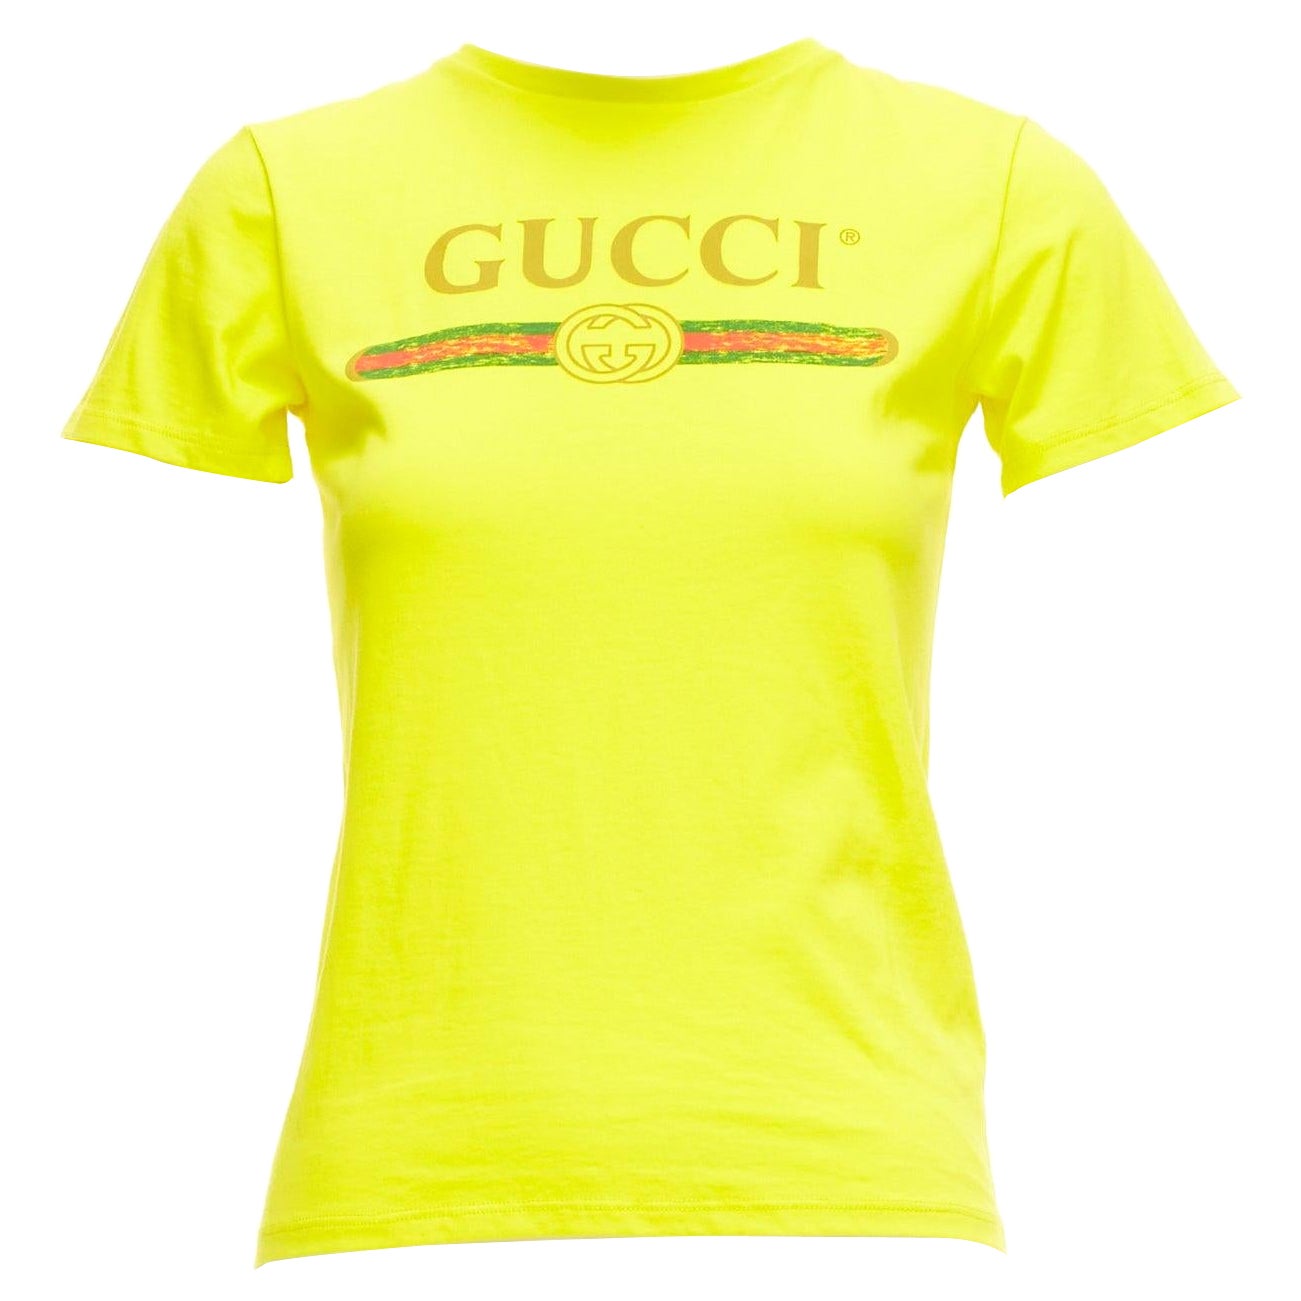 GUCCI KIDS bright yellow vintage logo crew neck tshirt 10Y XS For Sale